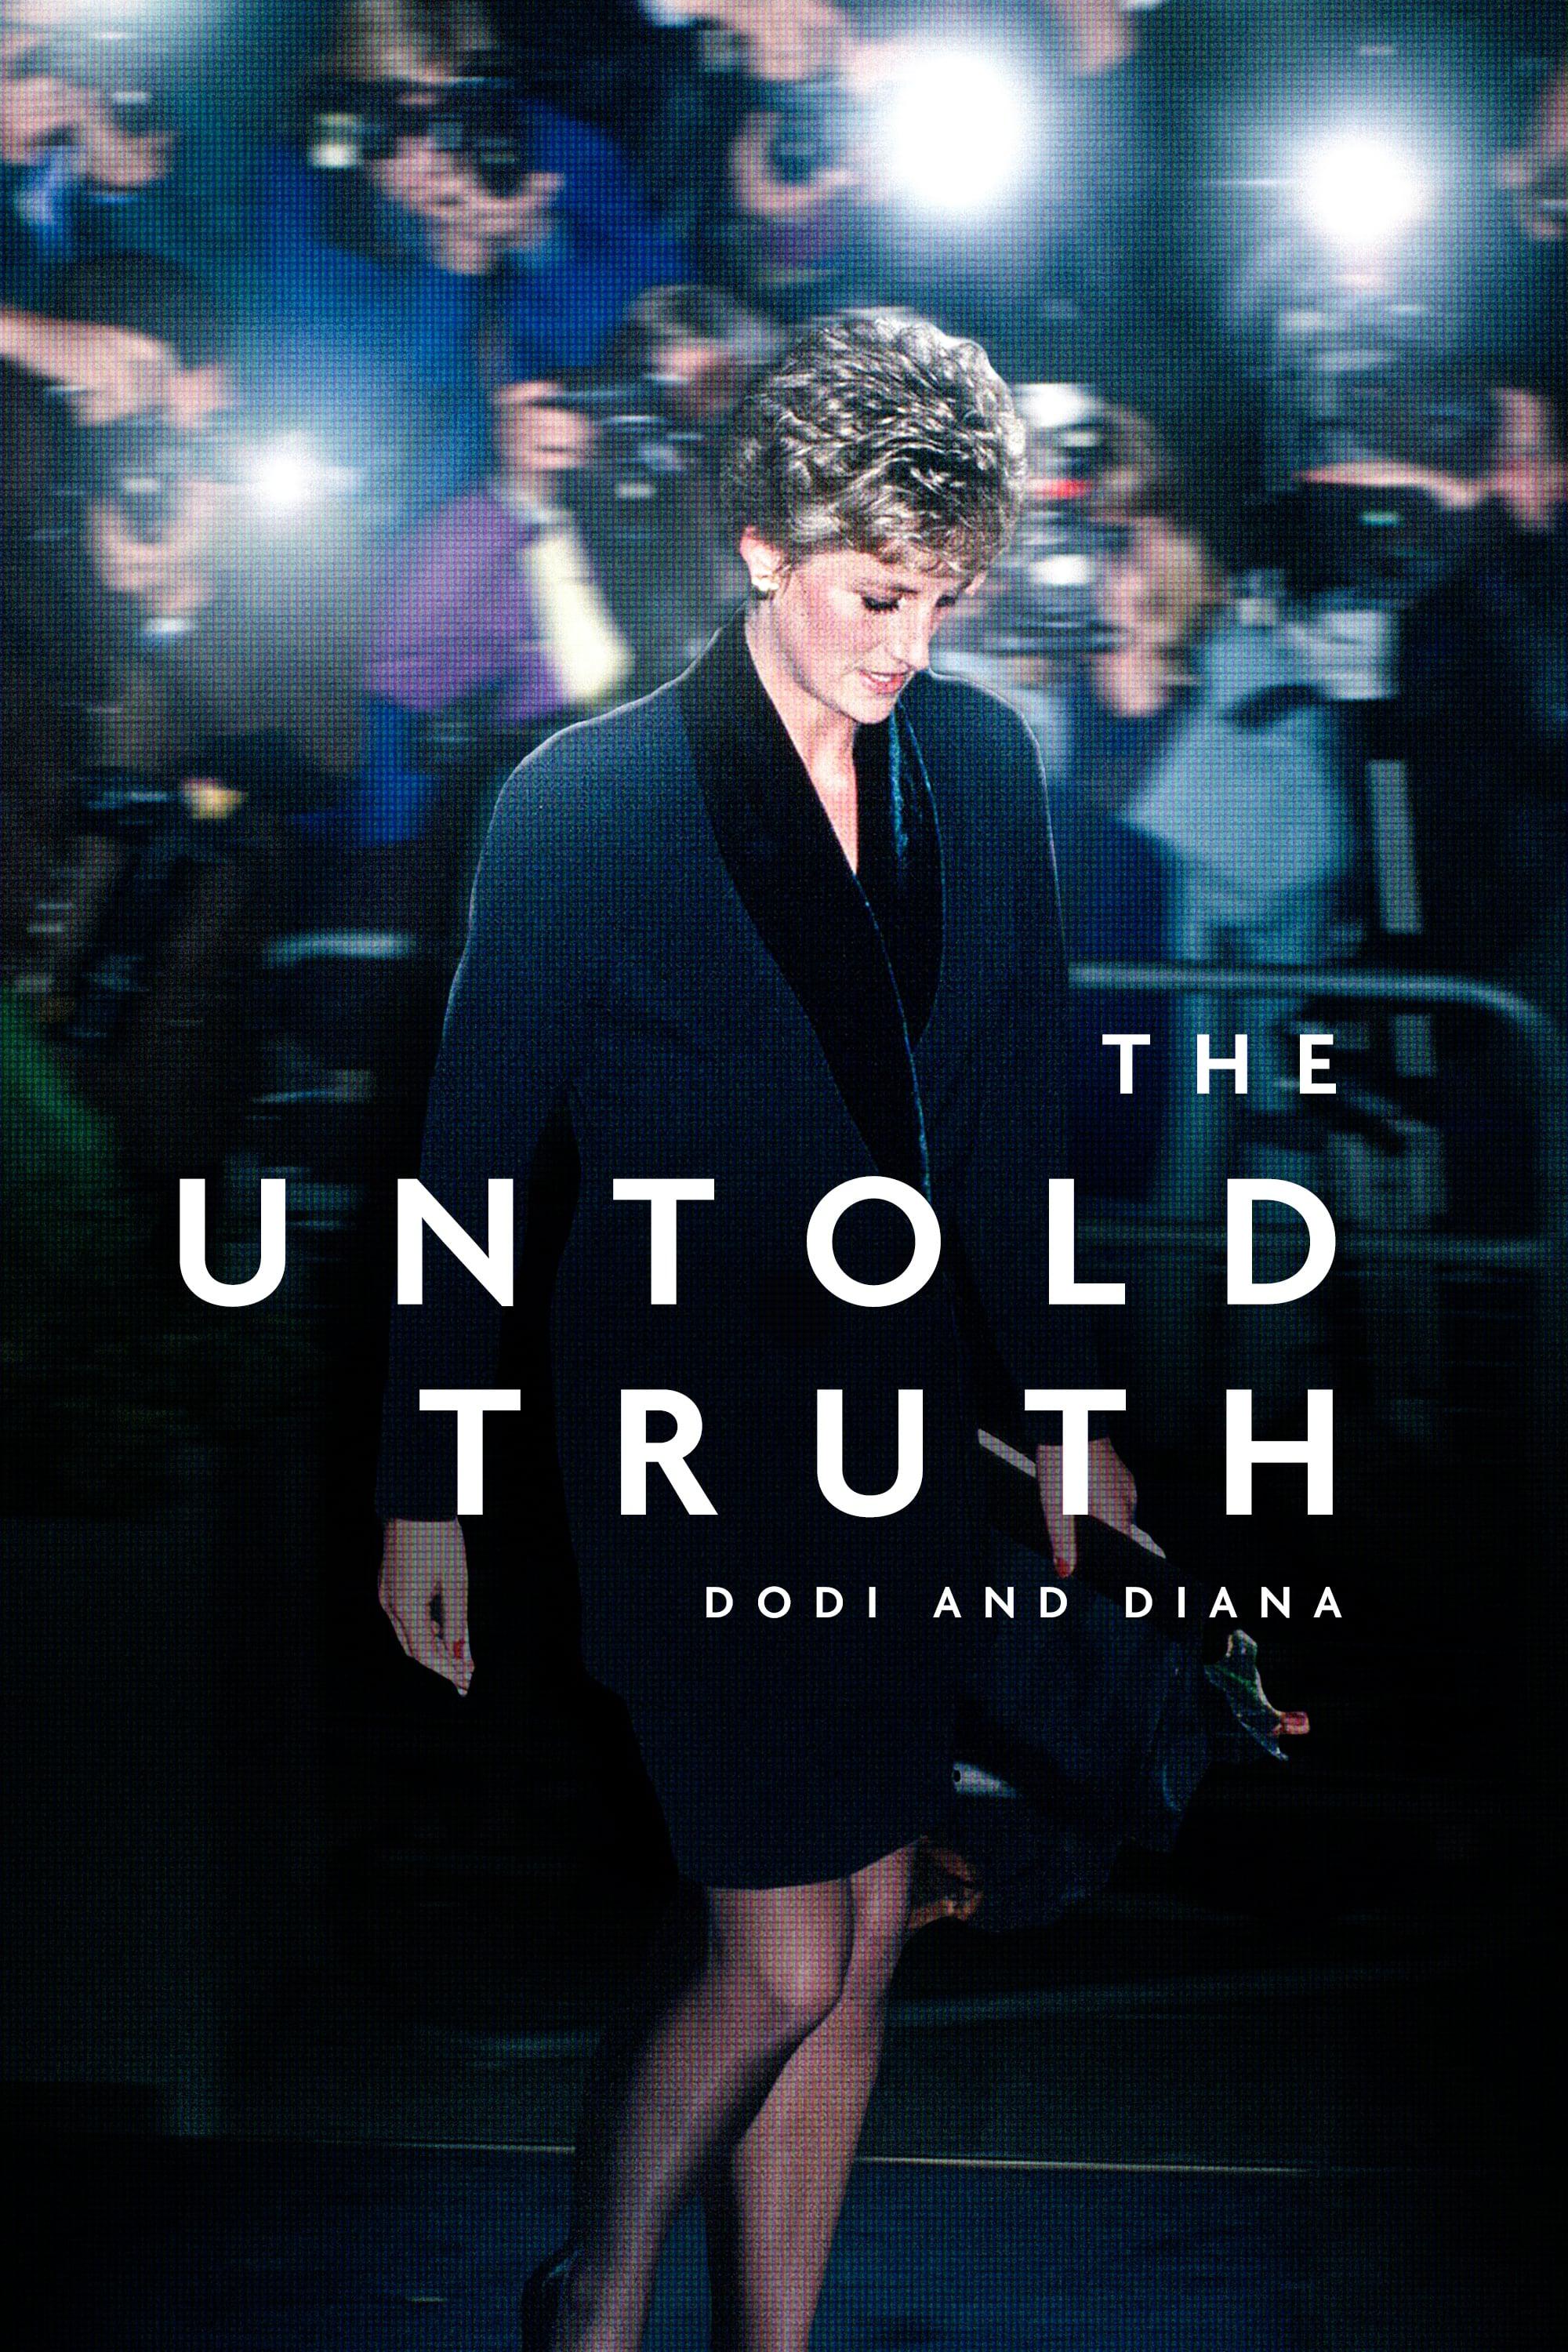 The Untold Truth: Dodi and Diana poster